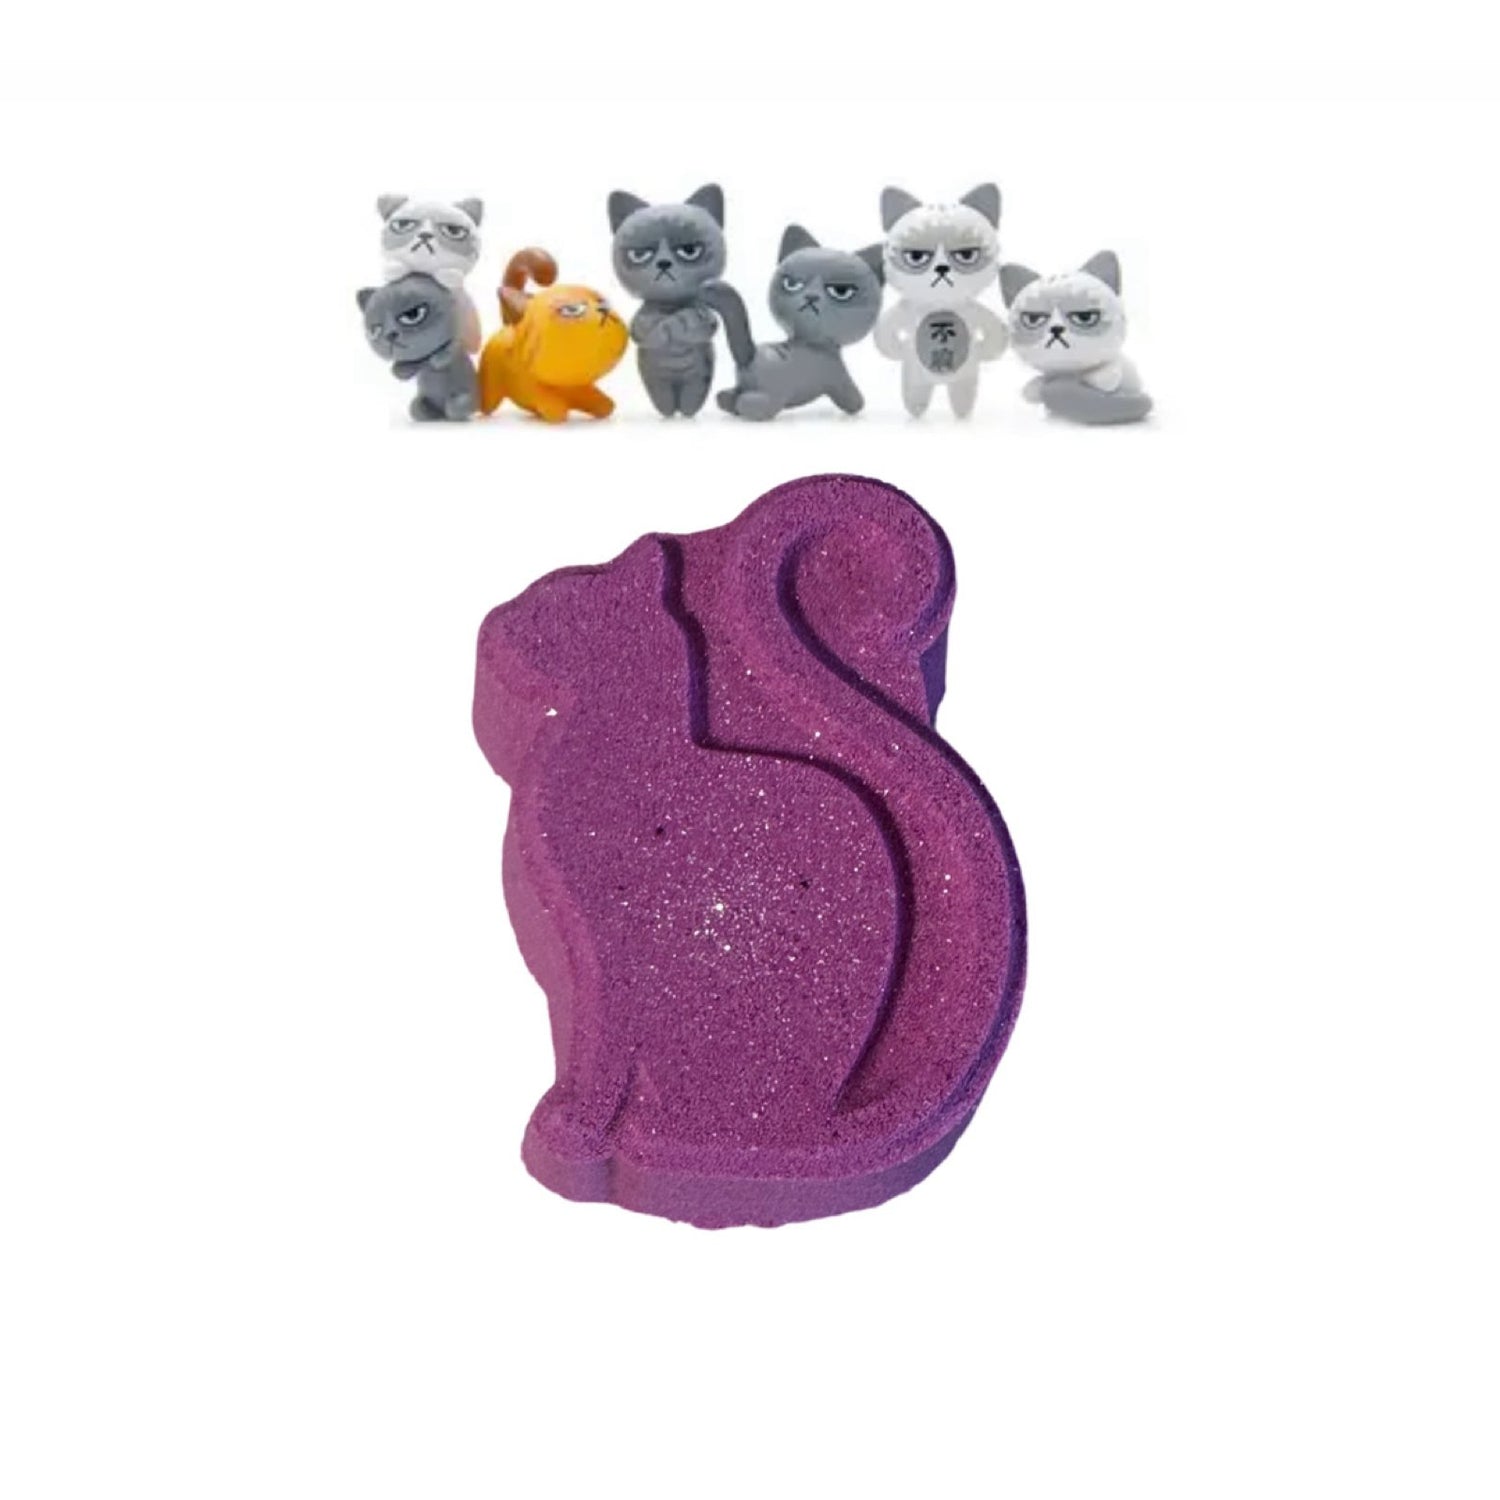 Bath Bomb with Toys Inside - Ages 3+